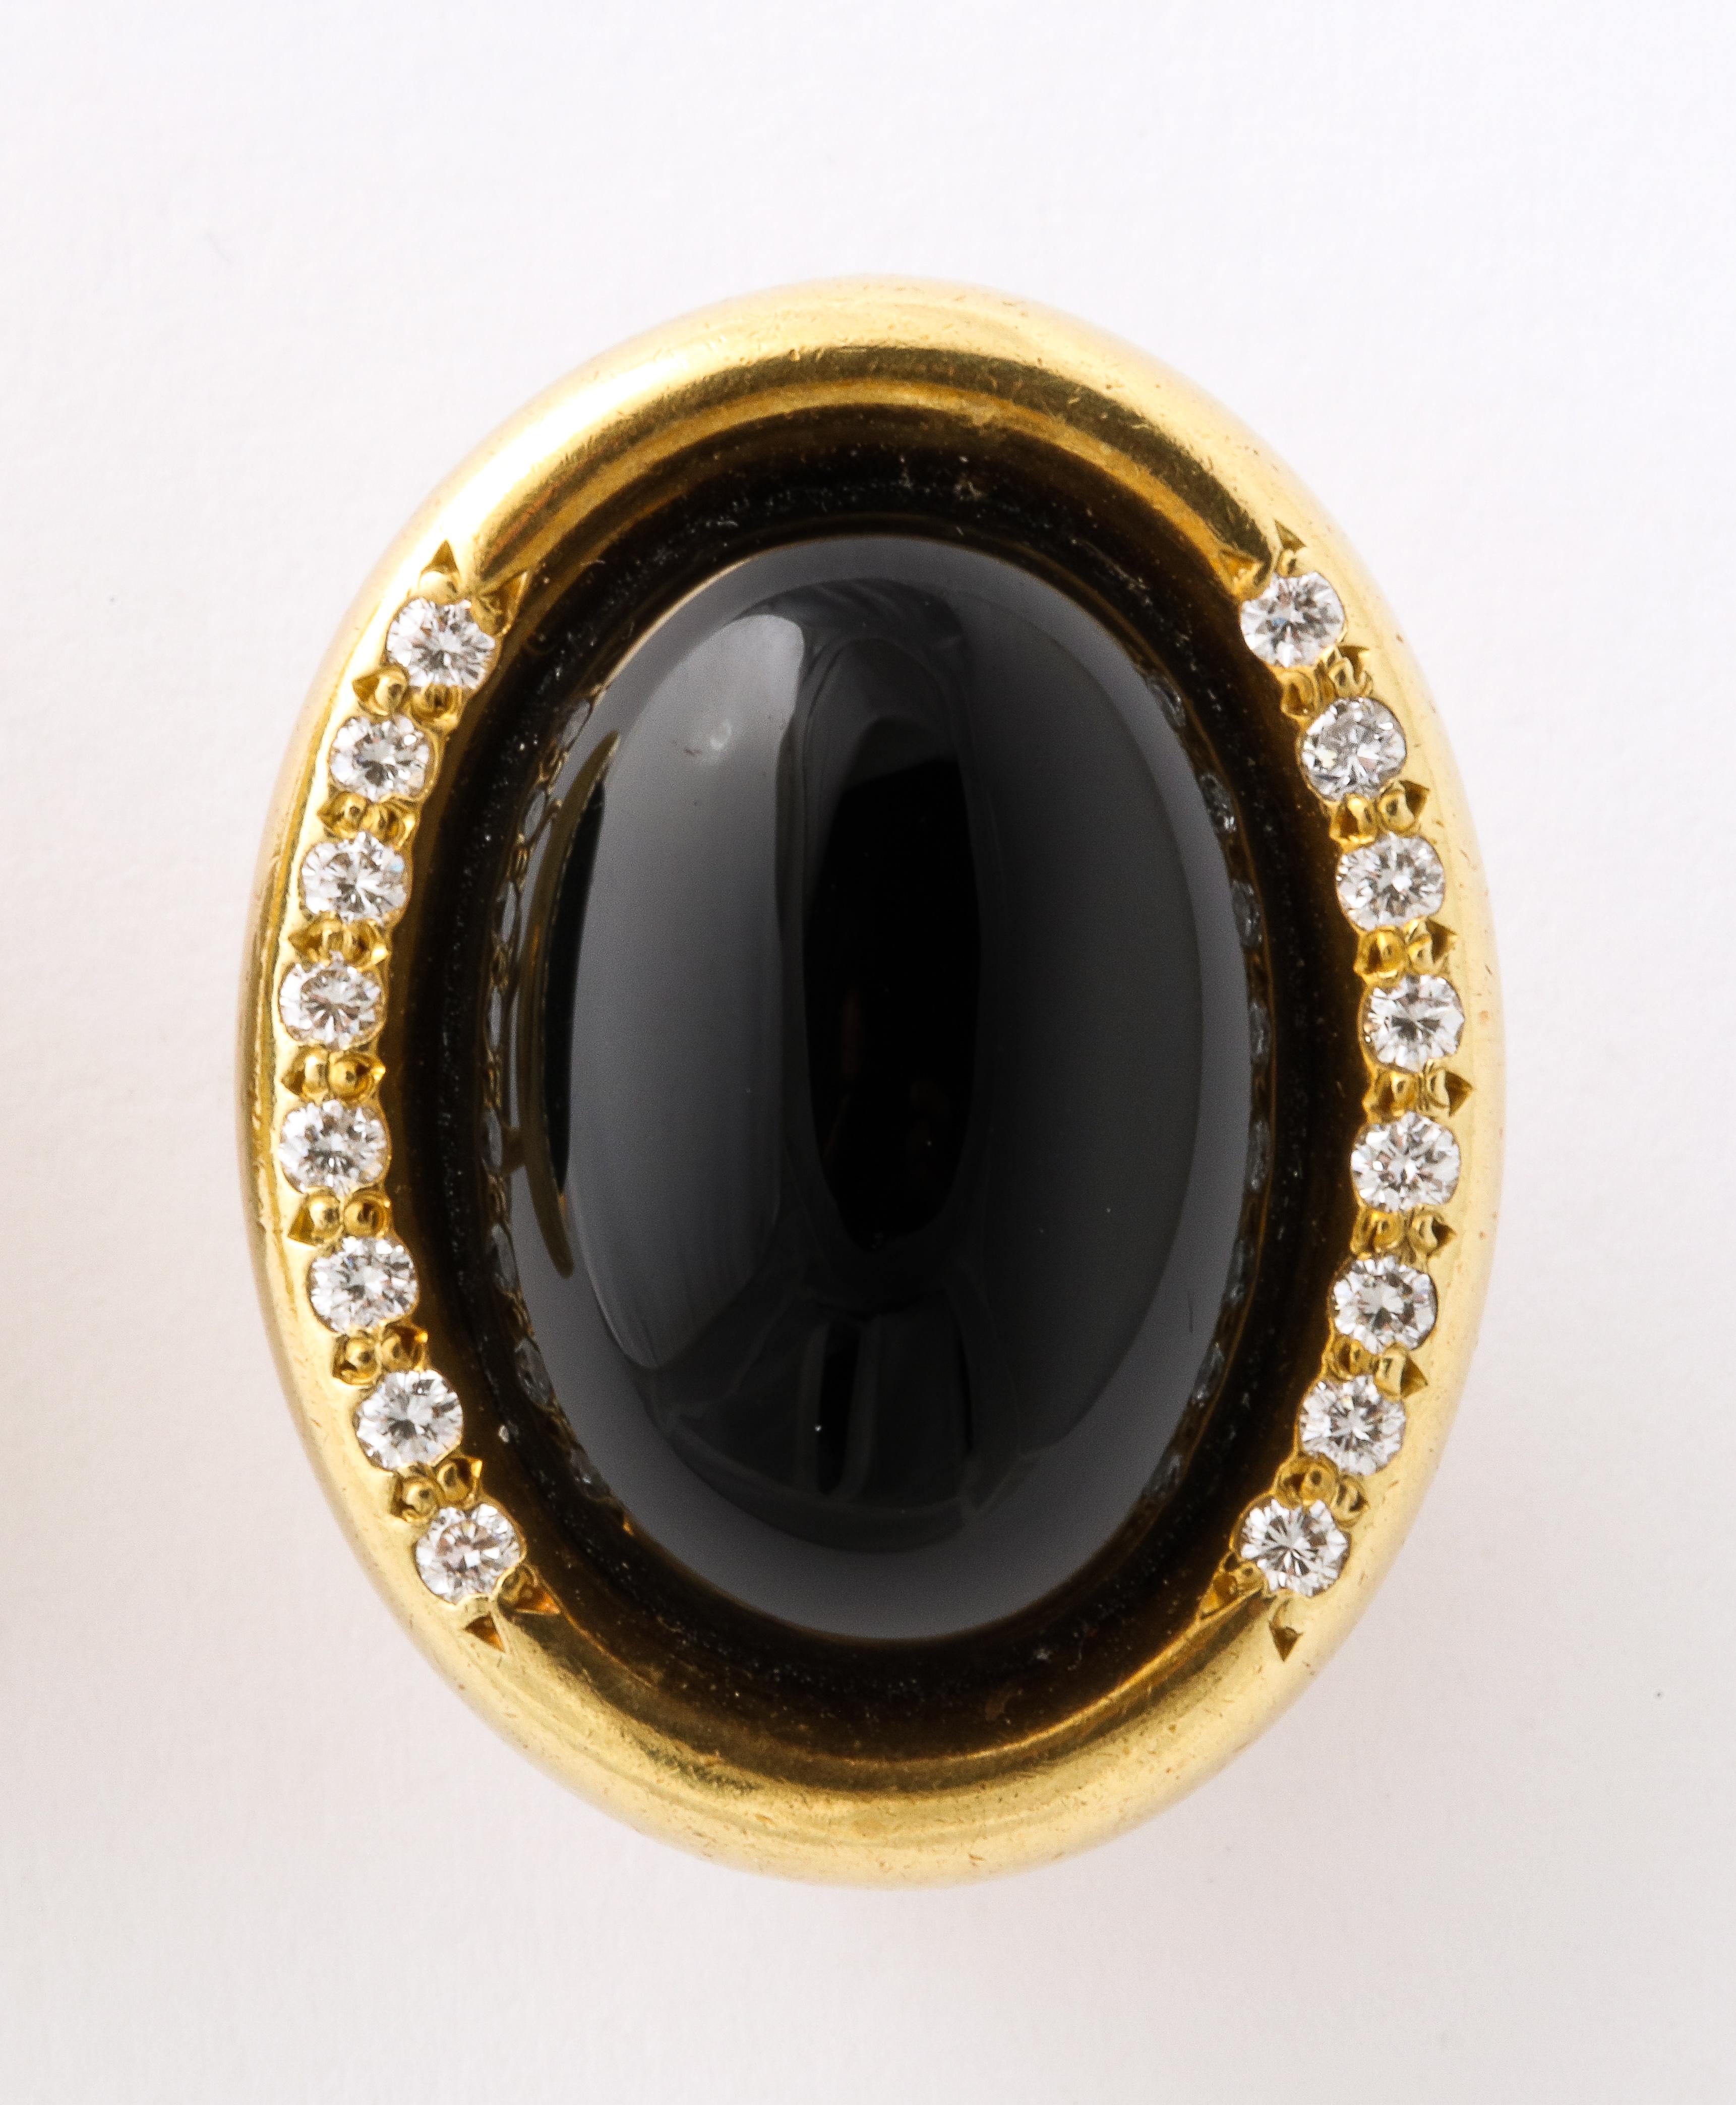 We offer these sophisticated 18K gold ear clips set with carved black jade and diamonds for your shopping, lunch, or evening out. Measuring 5/8 inches x 3/4 inches. Weighing 17.41 grams. Gold mark and Marker mark.
Esther Gallant is nationally and